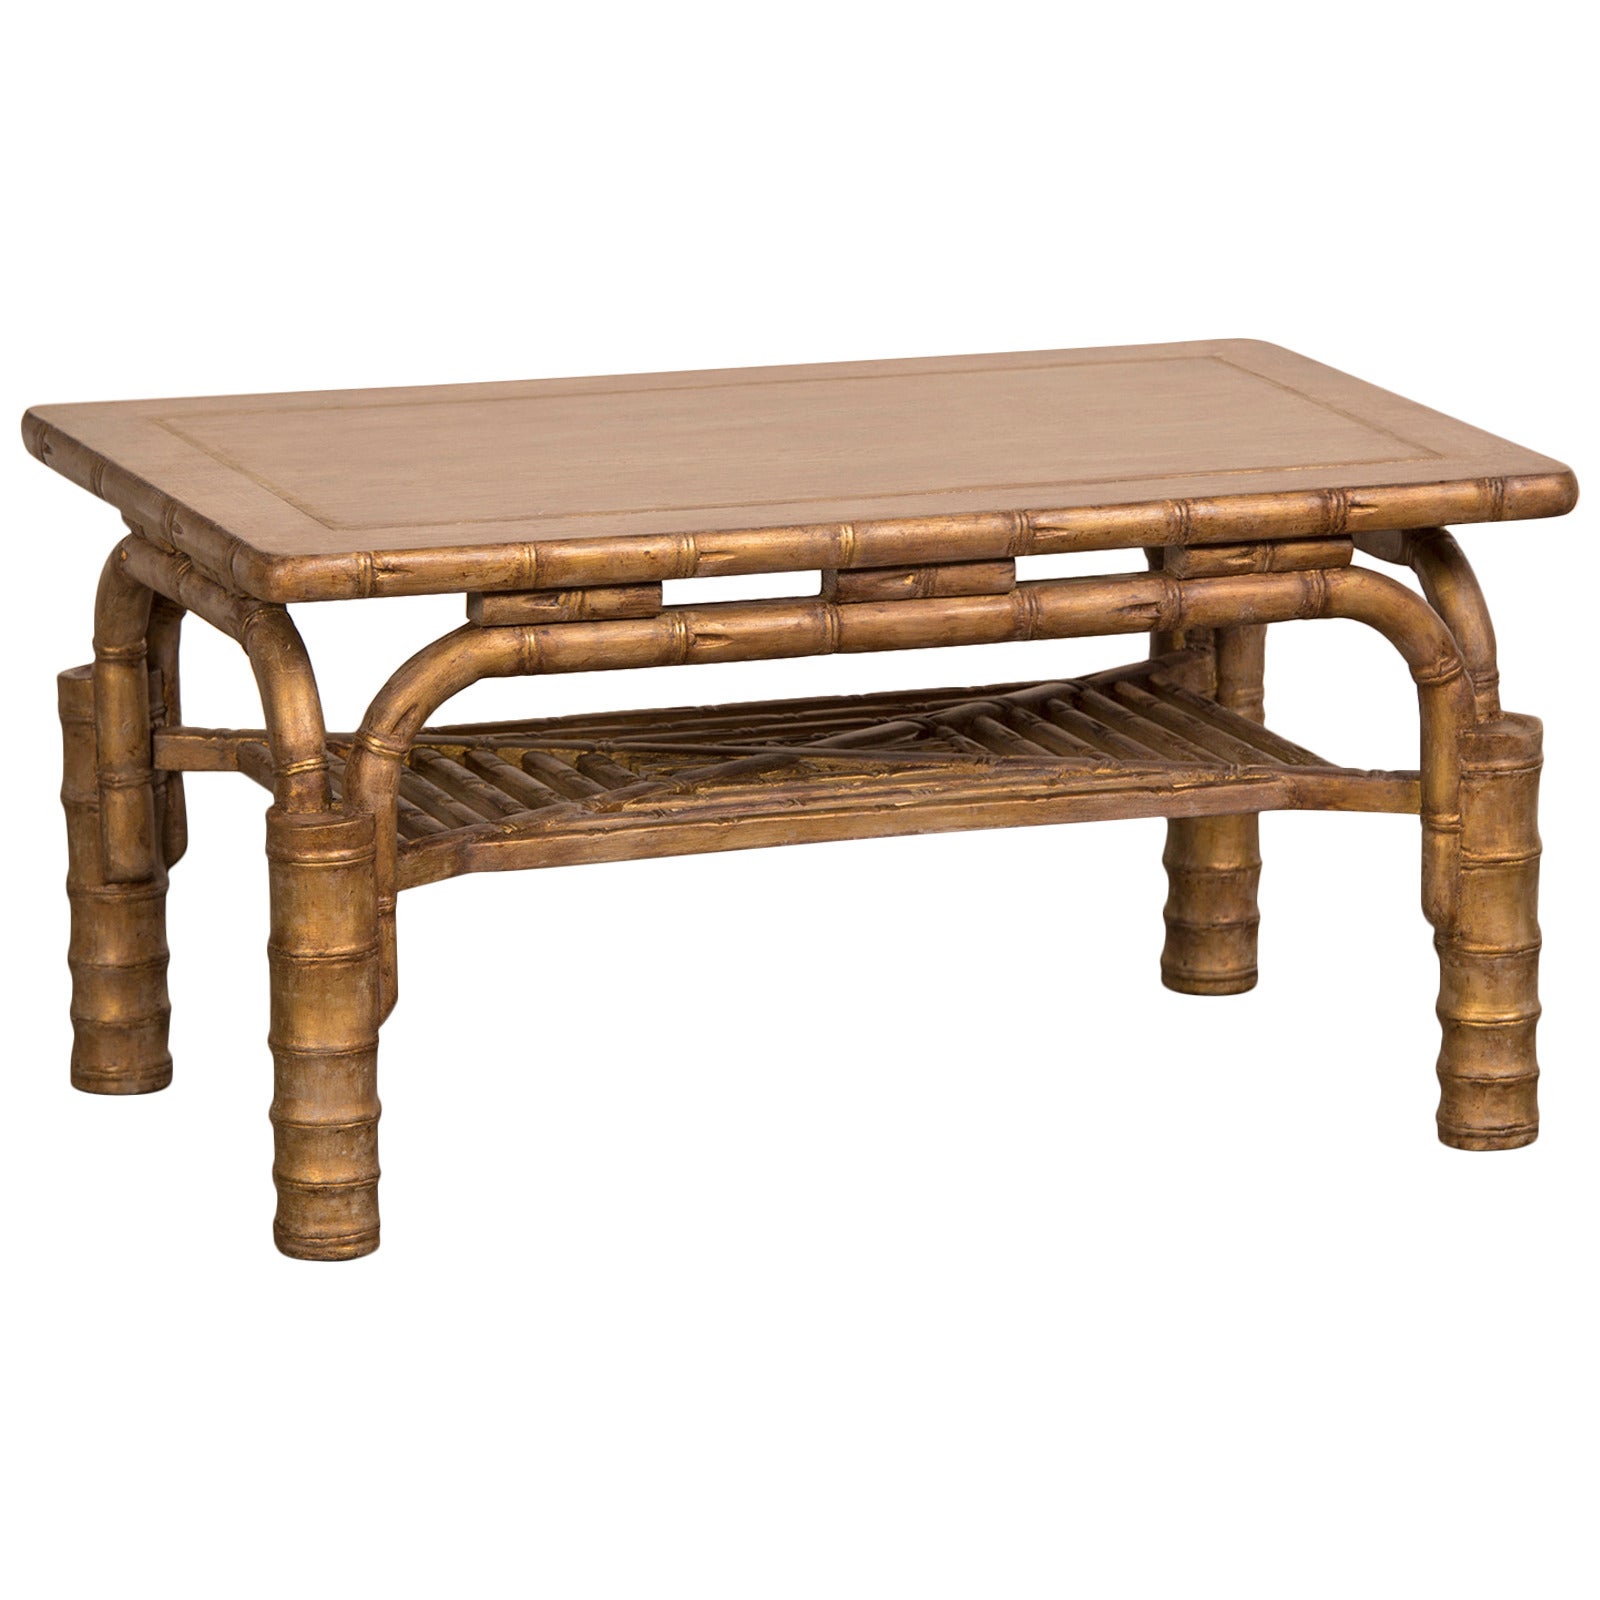 Striking Vintage French Gilded Coffee Table Standing on Bamboo Legs, circa 1910 For Sale